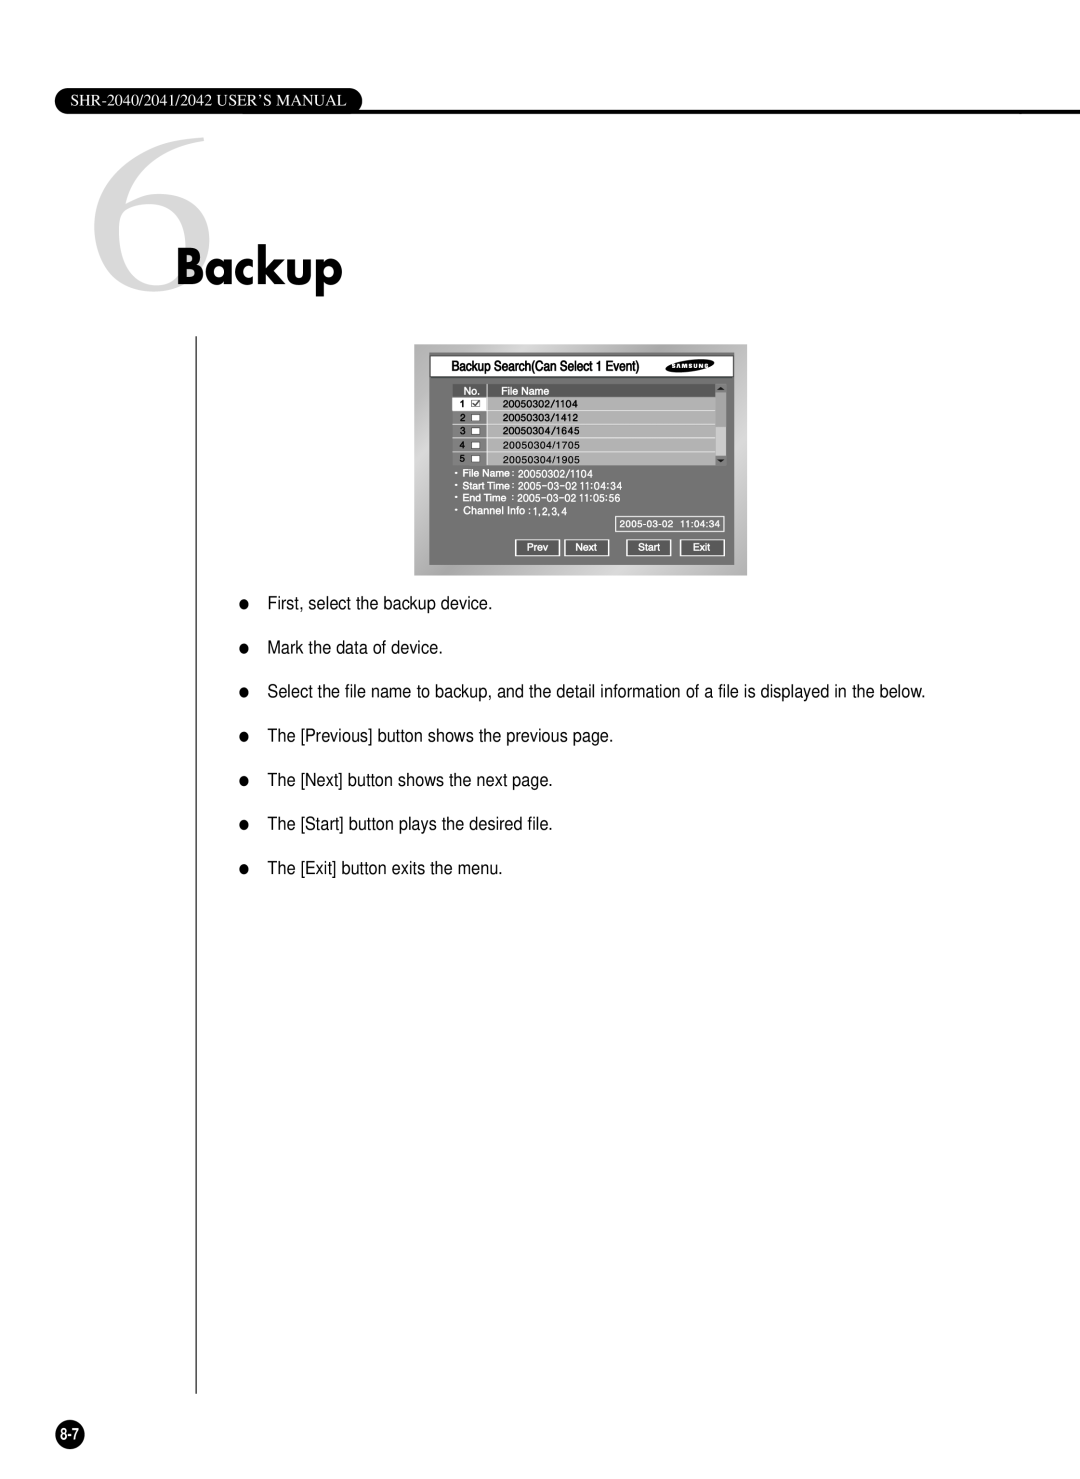 Samsung SHR-2040P 6Backup, First, select the backup device Mark the data of device, The Next button shows the next page 